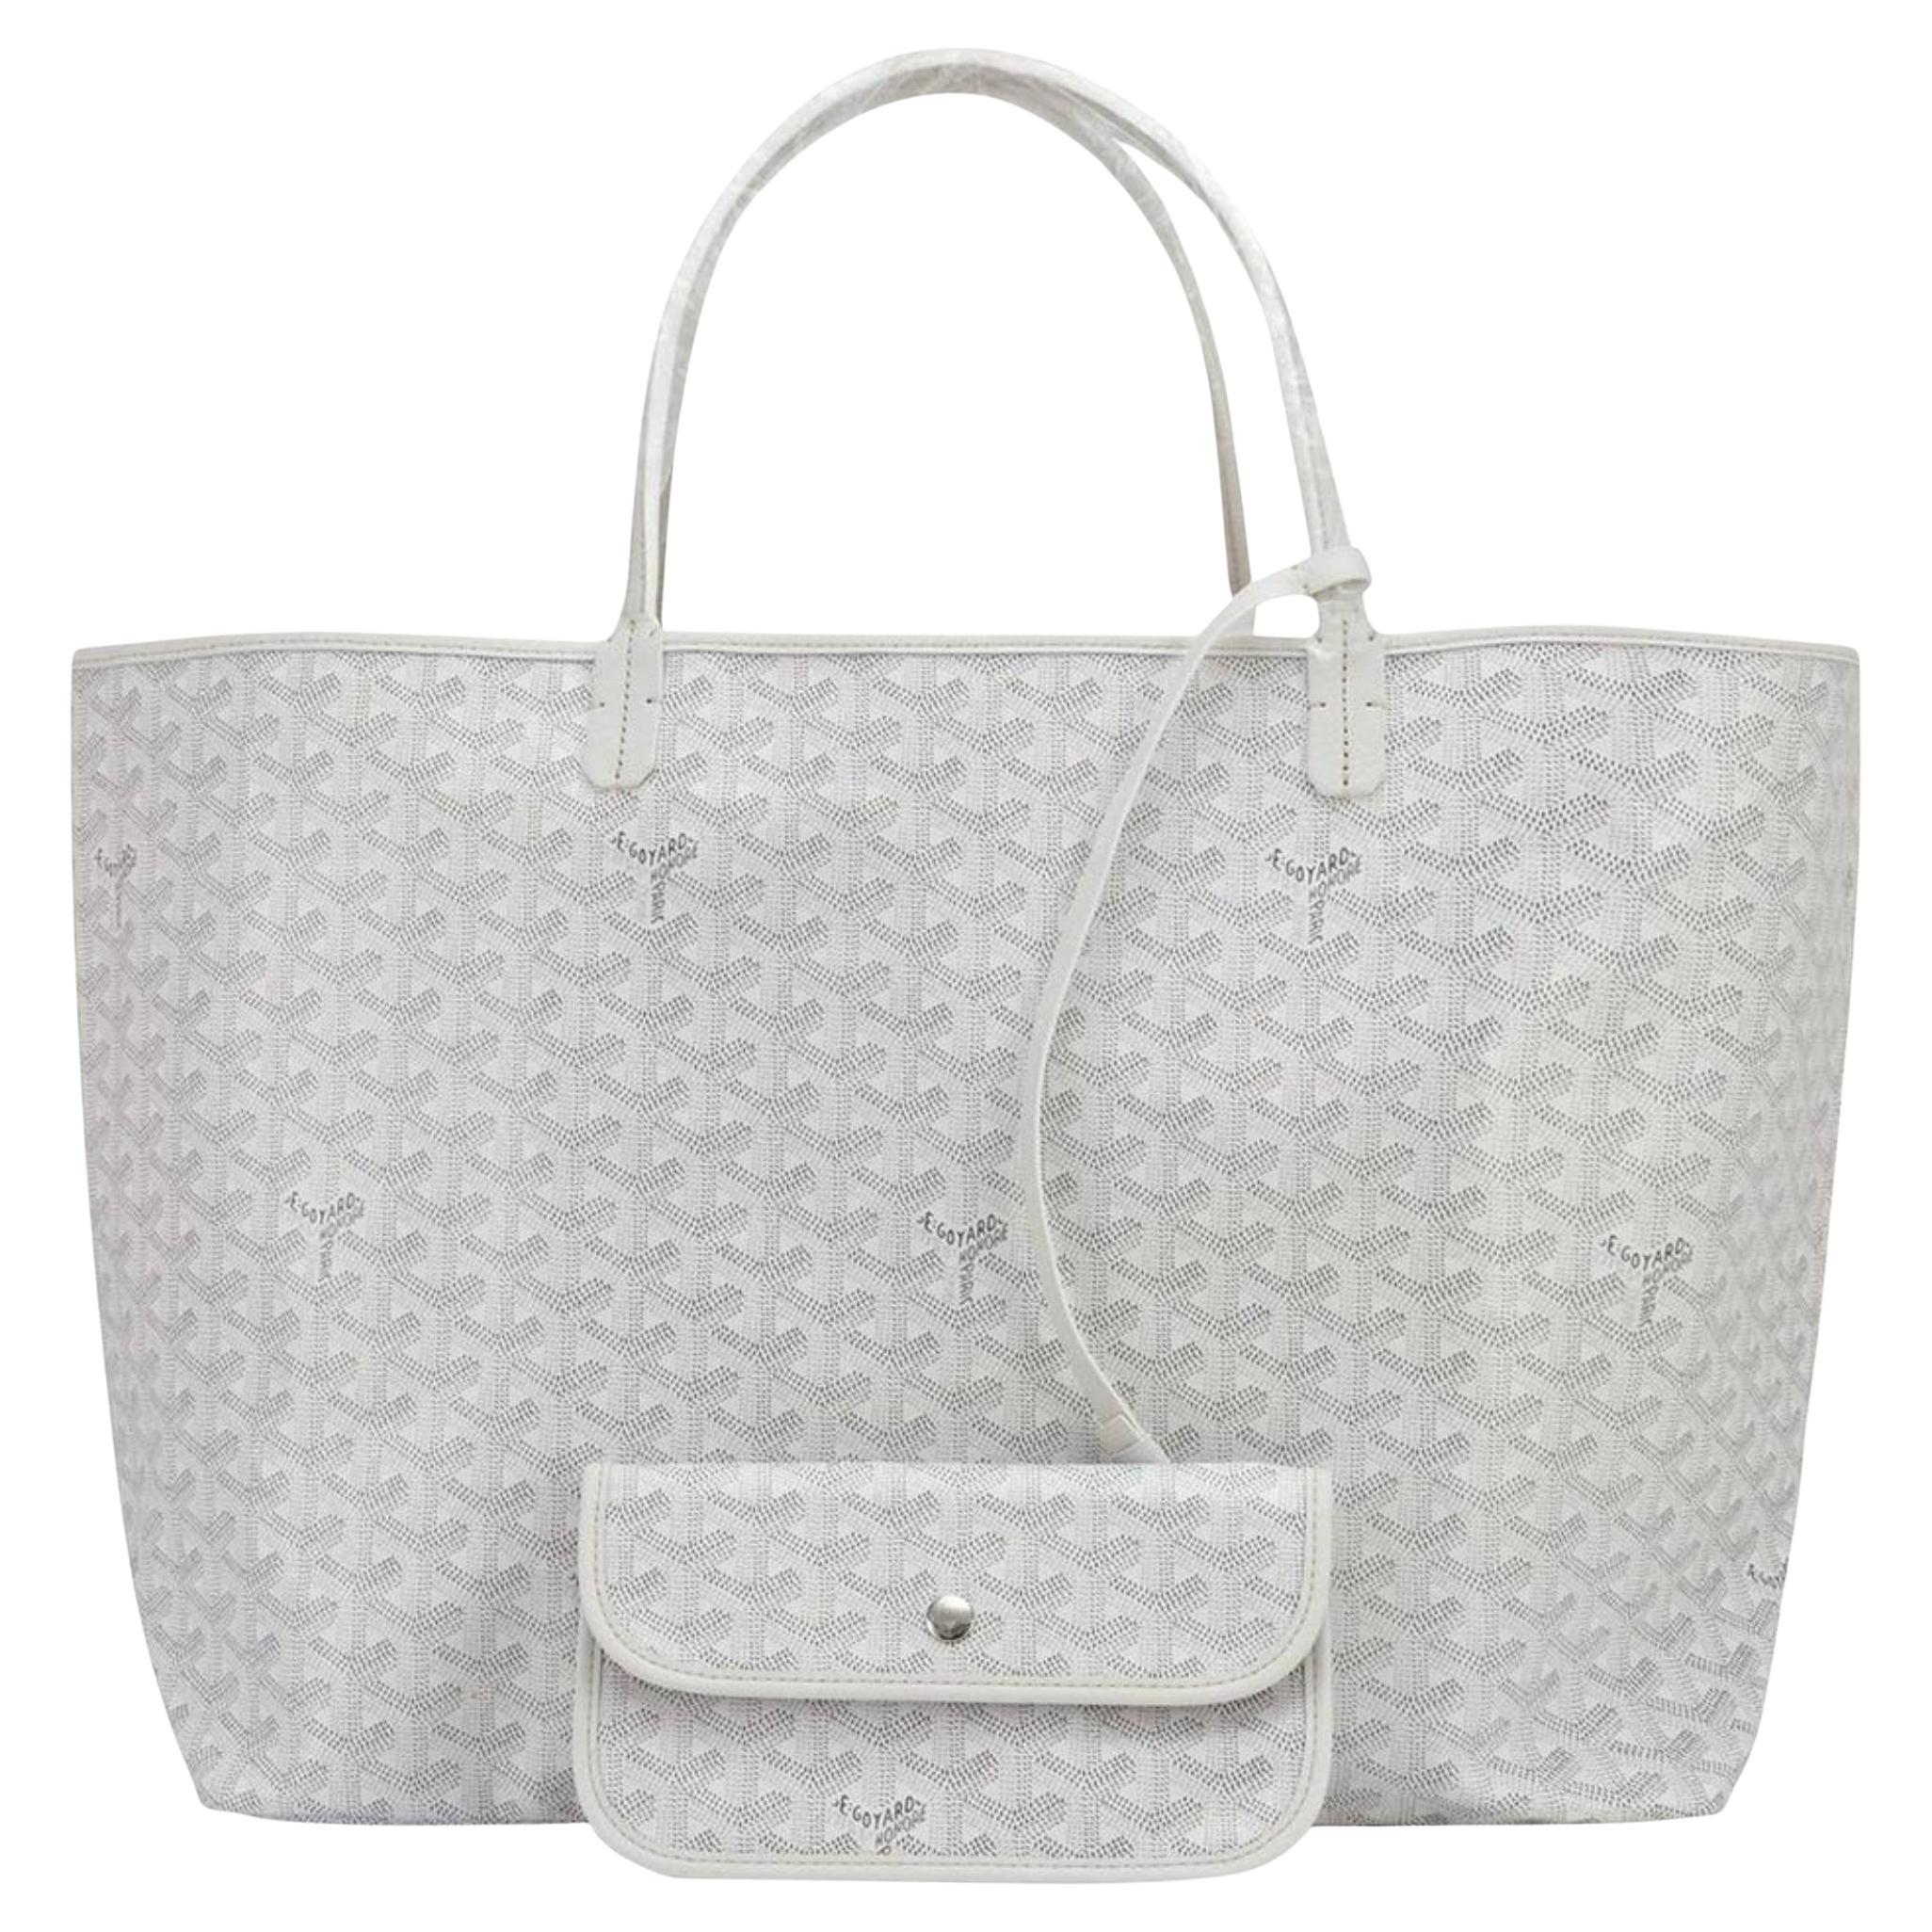 Goyard White St Louis PM Tote Bag with Pouch 113gy45 For Sale